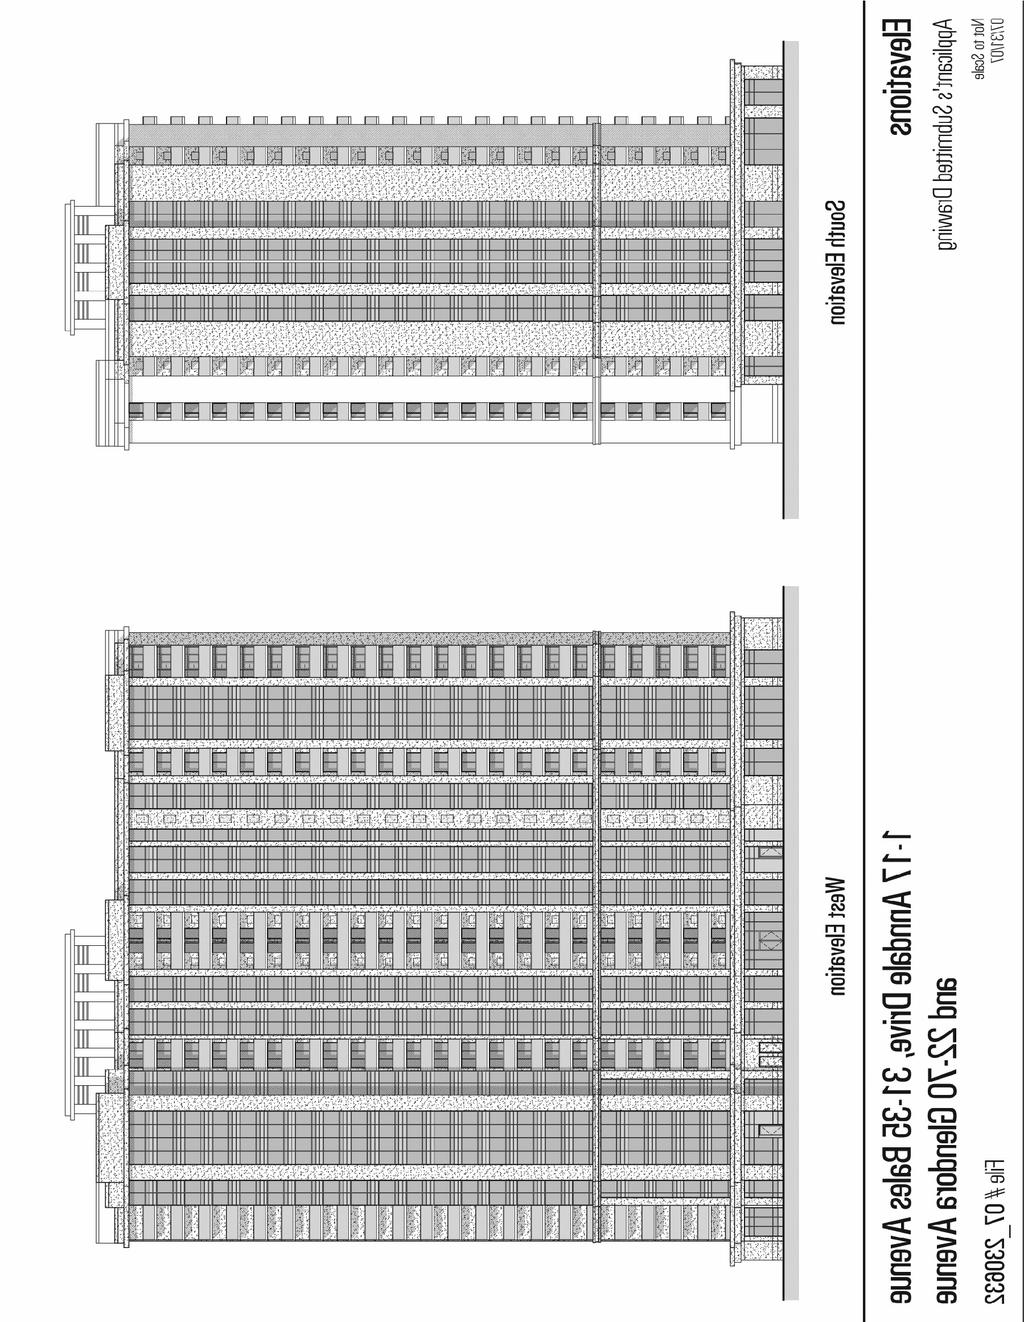 Attachment 2b: South and West Tower Elevations Staff report for